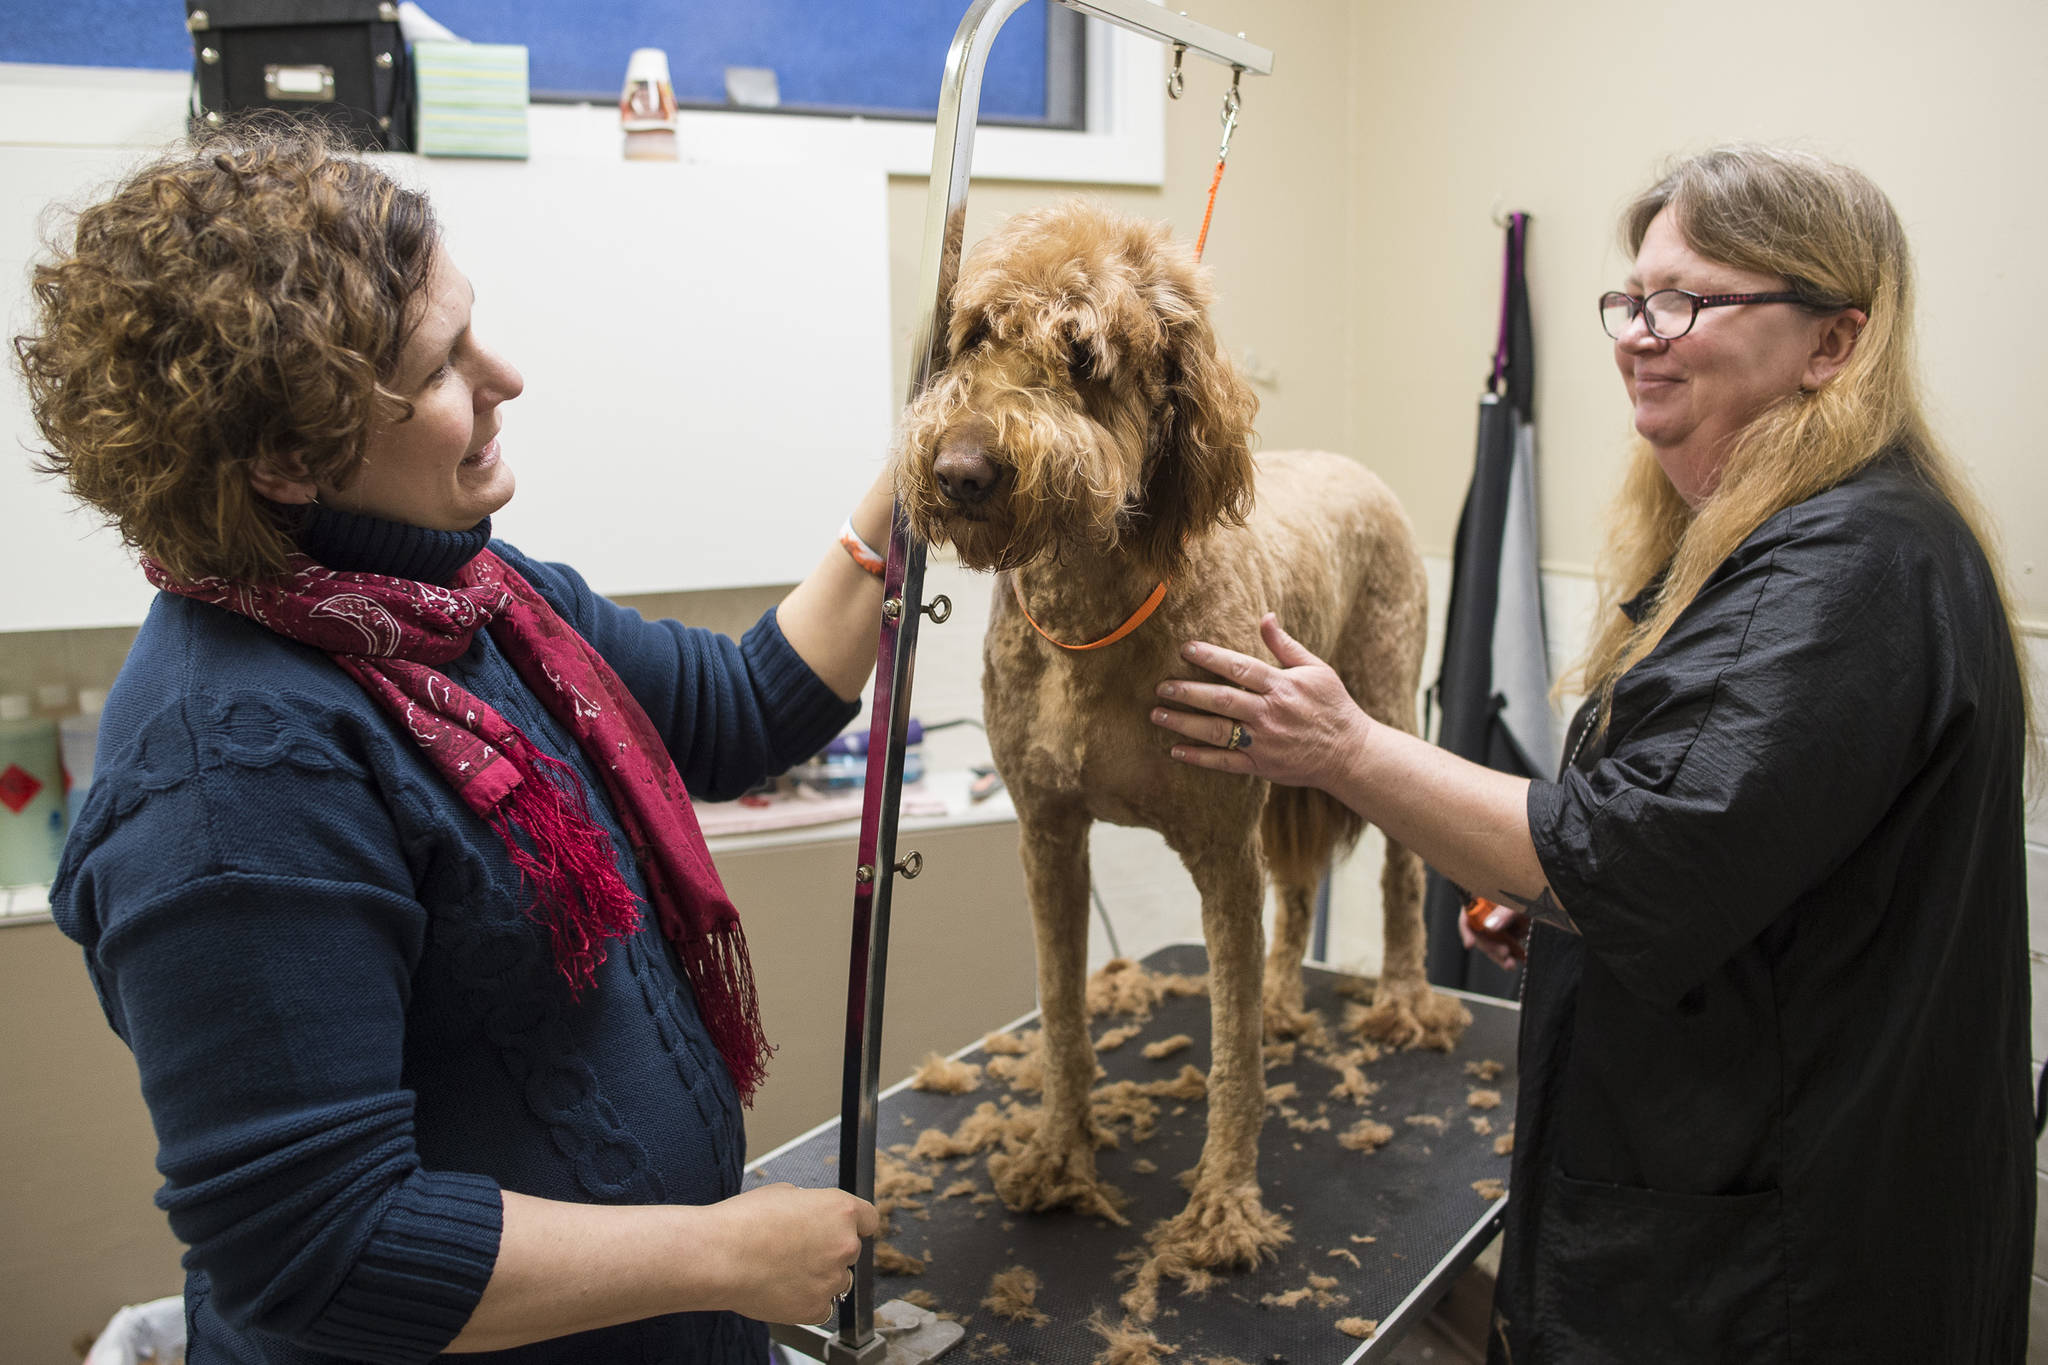 Executive Director Samantha Blankenship, left, looks on as Kennel Supervisor Heather Harper gives Delilah, a laborador/poodle mix, a trim at the Gastineau Humane Society on Friday, Dec. 28, 2018. The society is starting the new year with a name change to Juneau Animal Rescue. (Michael Penn | Juneau Empire)